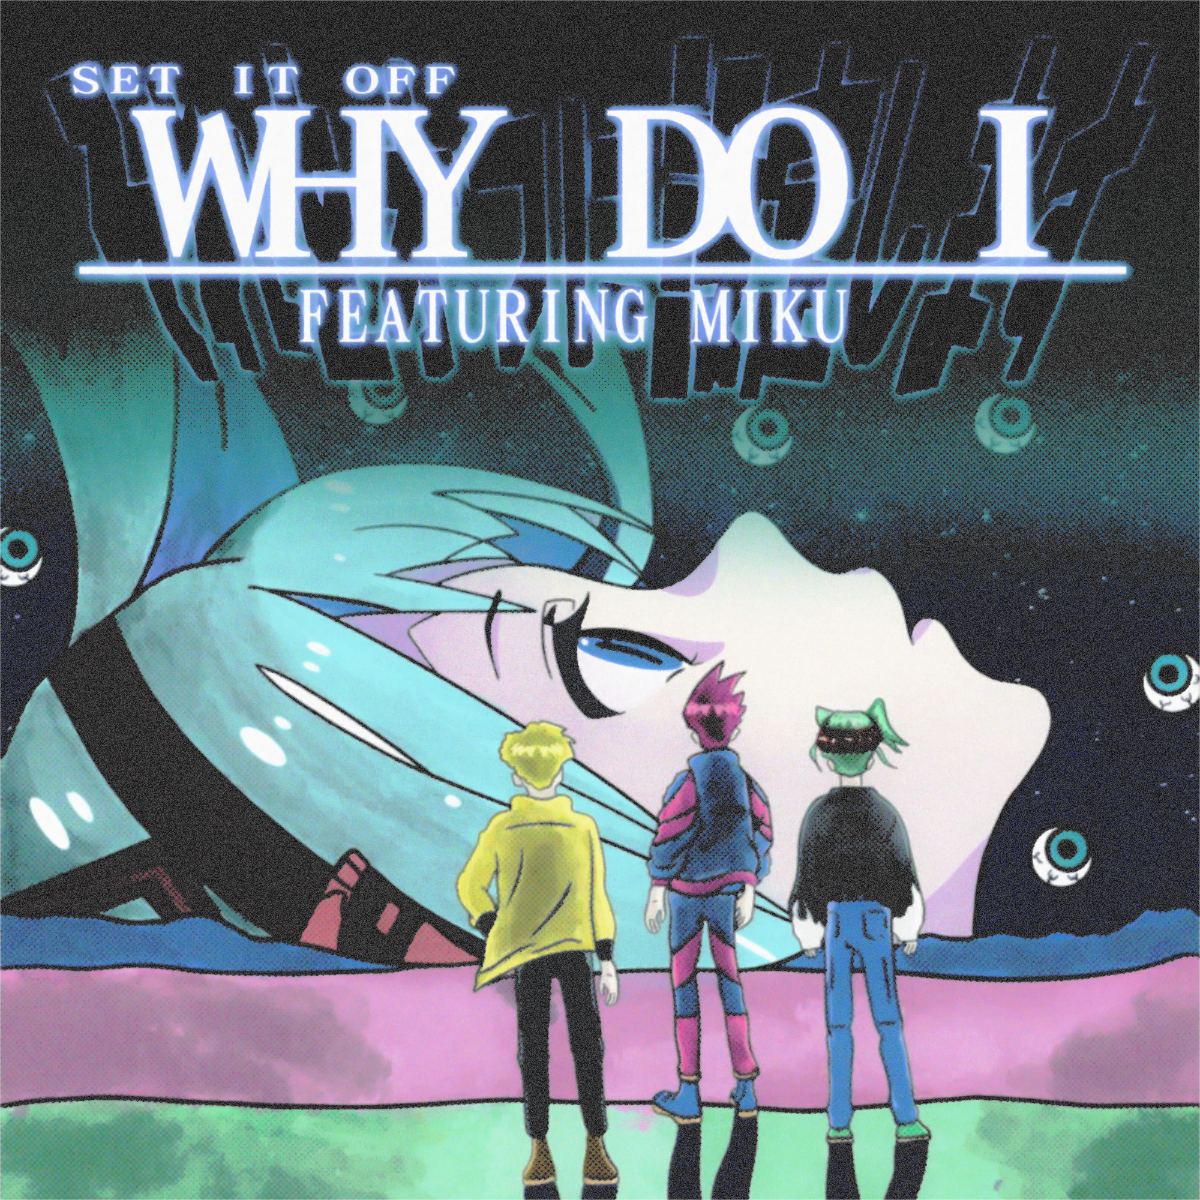 Set It Off Share Visualizer for “Why Do I” Feat. Vocaloid Hatsune Miku – R  o c k 'N' L o a d